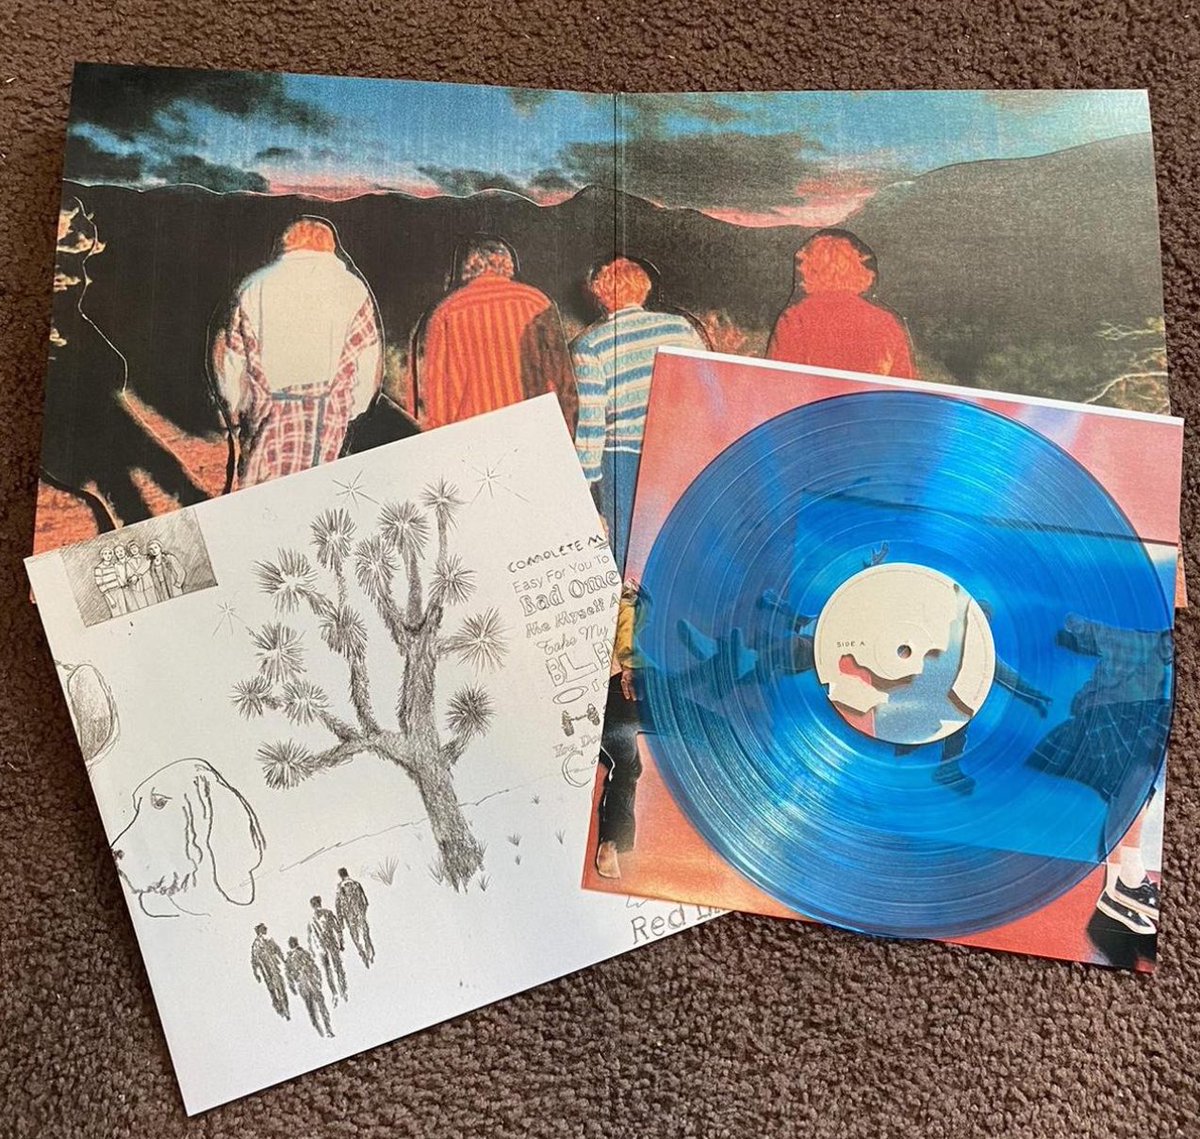 5SOS5 Vinyl Giveaway!

We wanted to do something fun to celebrate the kickoff of The 5SOS Show so we’re giving away one blue whirlpool ‘Spotify Fans First’ vinyl of 5SOS5!

Giveaway starts today (8/2) and ends on 8/15! This is open to everyone worldwide! 

Retweet and reply with